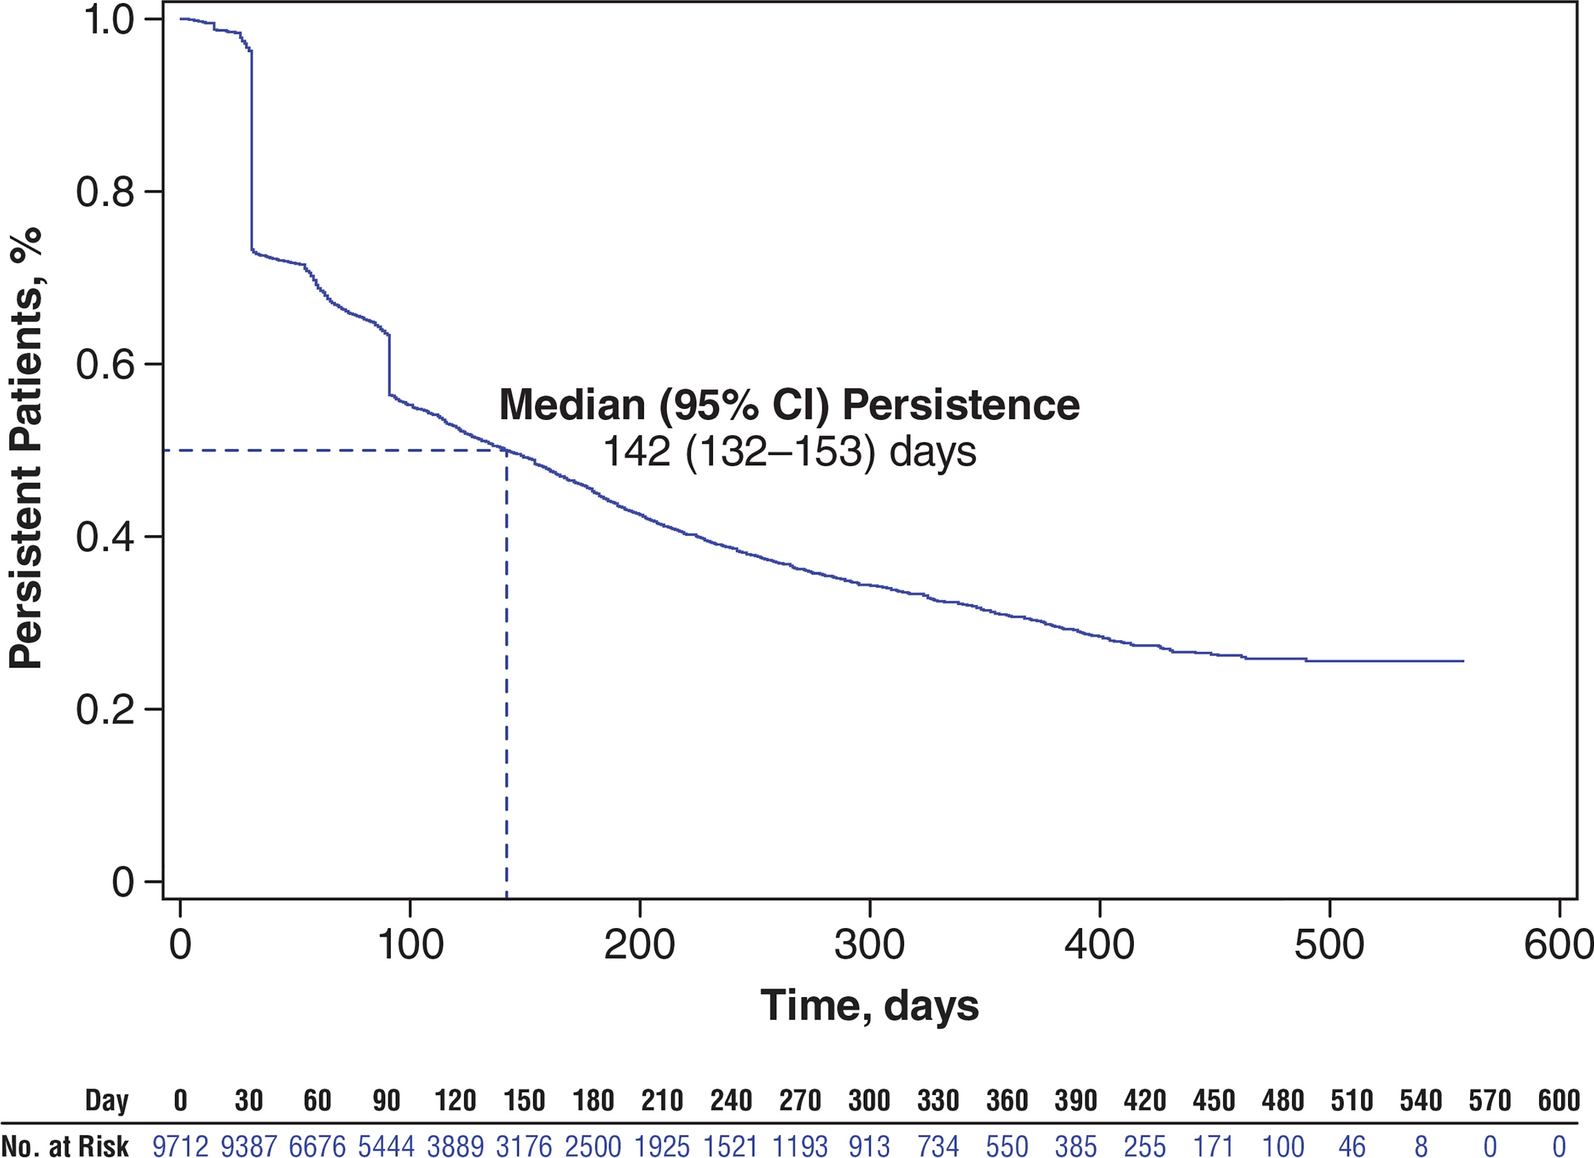 Real-World Adherence to and Persistence with Vibegron in Patients with Overactive Bladder: A Retrospective Claims Analysis